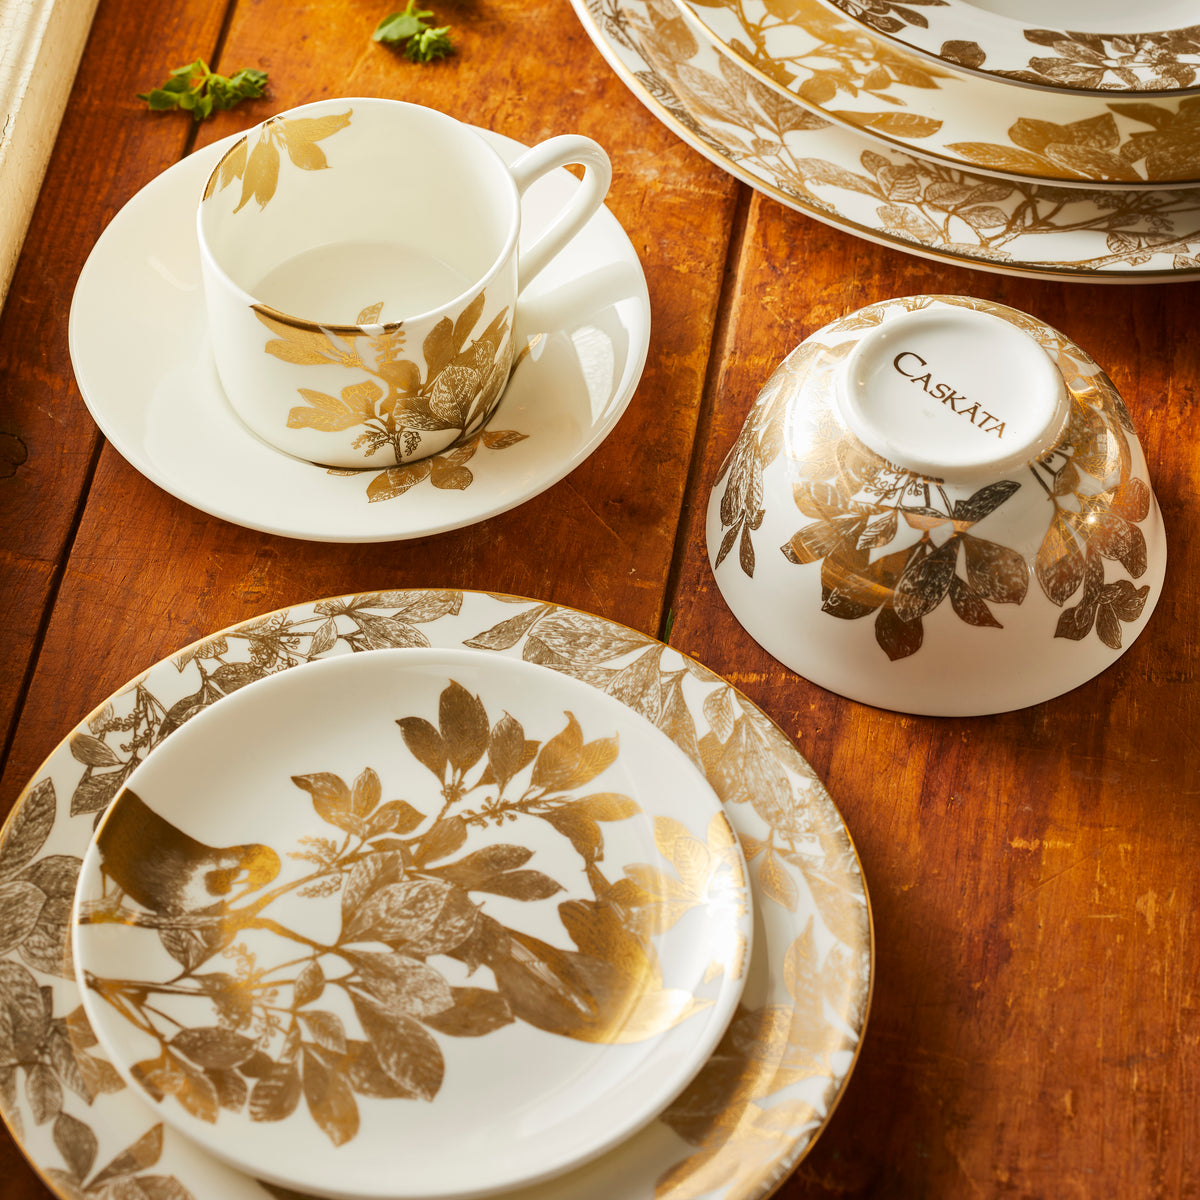 A collection of Arbor Gold dinnerware from Caskata, including a canapé plate on a salad plate, cup and saucer, small bowl and stack of plates on a rustic wooden tabletop.